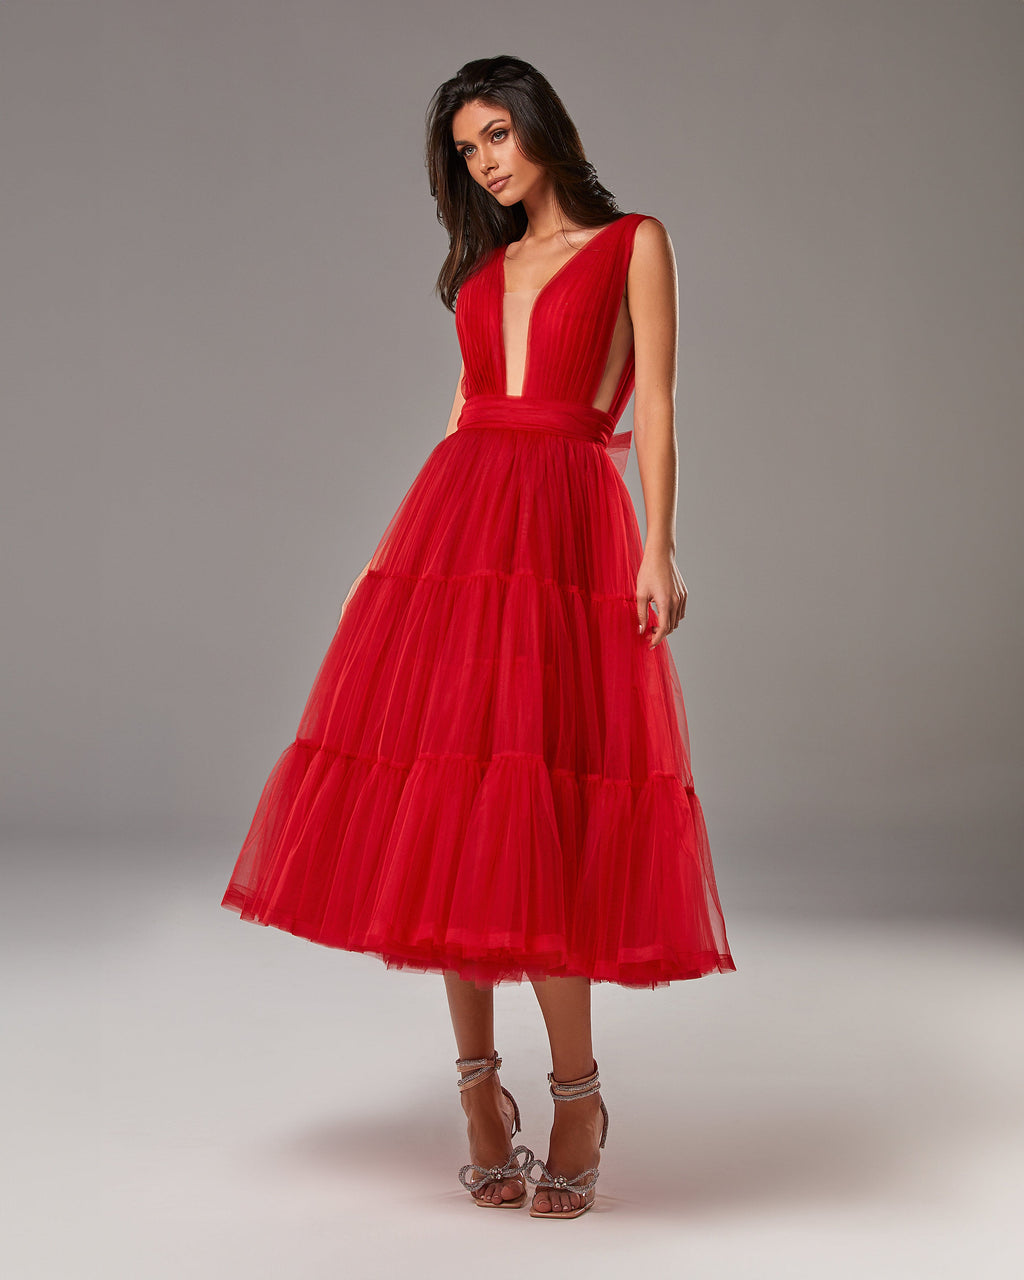 Red Tender midi plunging neckline cut out dress